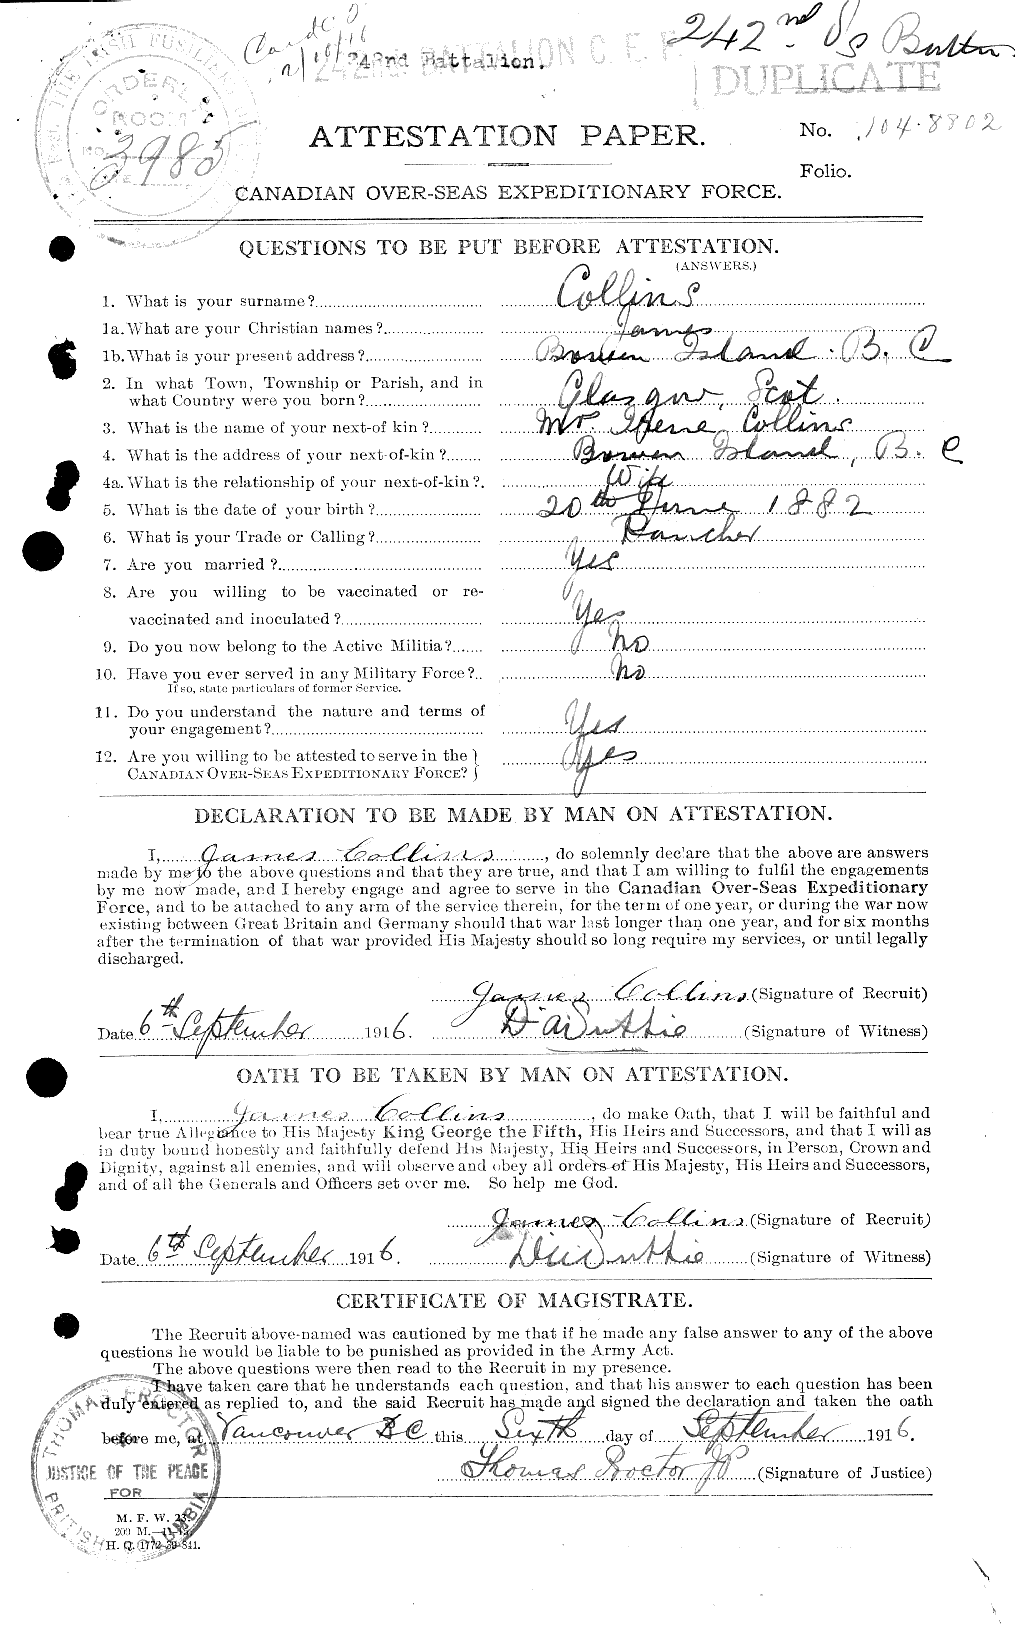 Personnel Records of the First World War - CEF 037917a